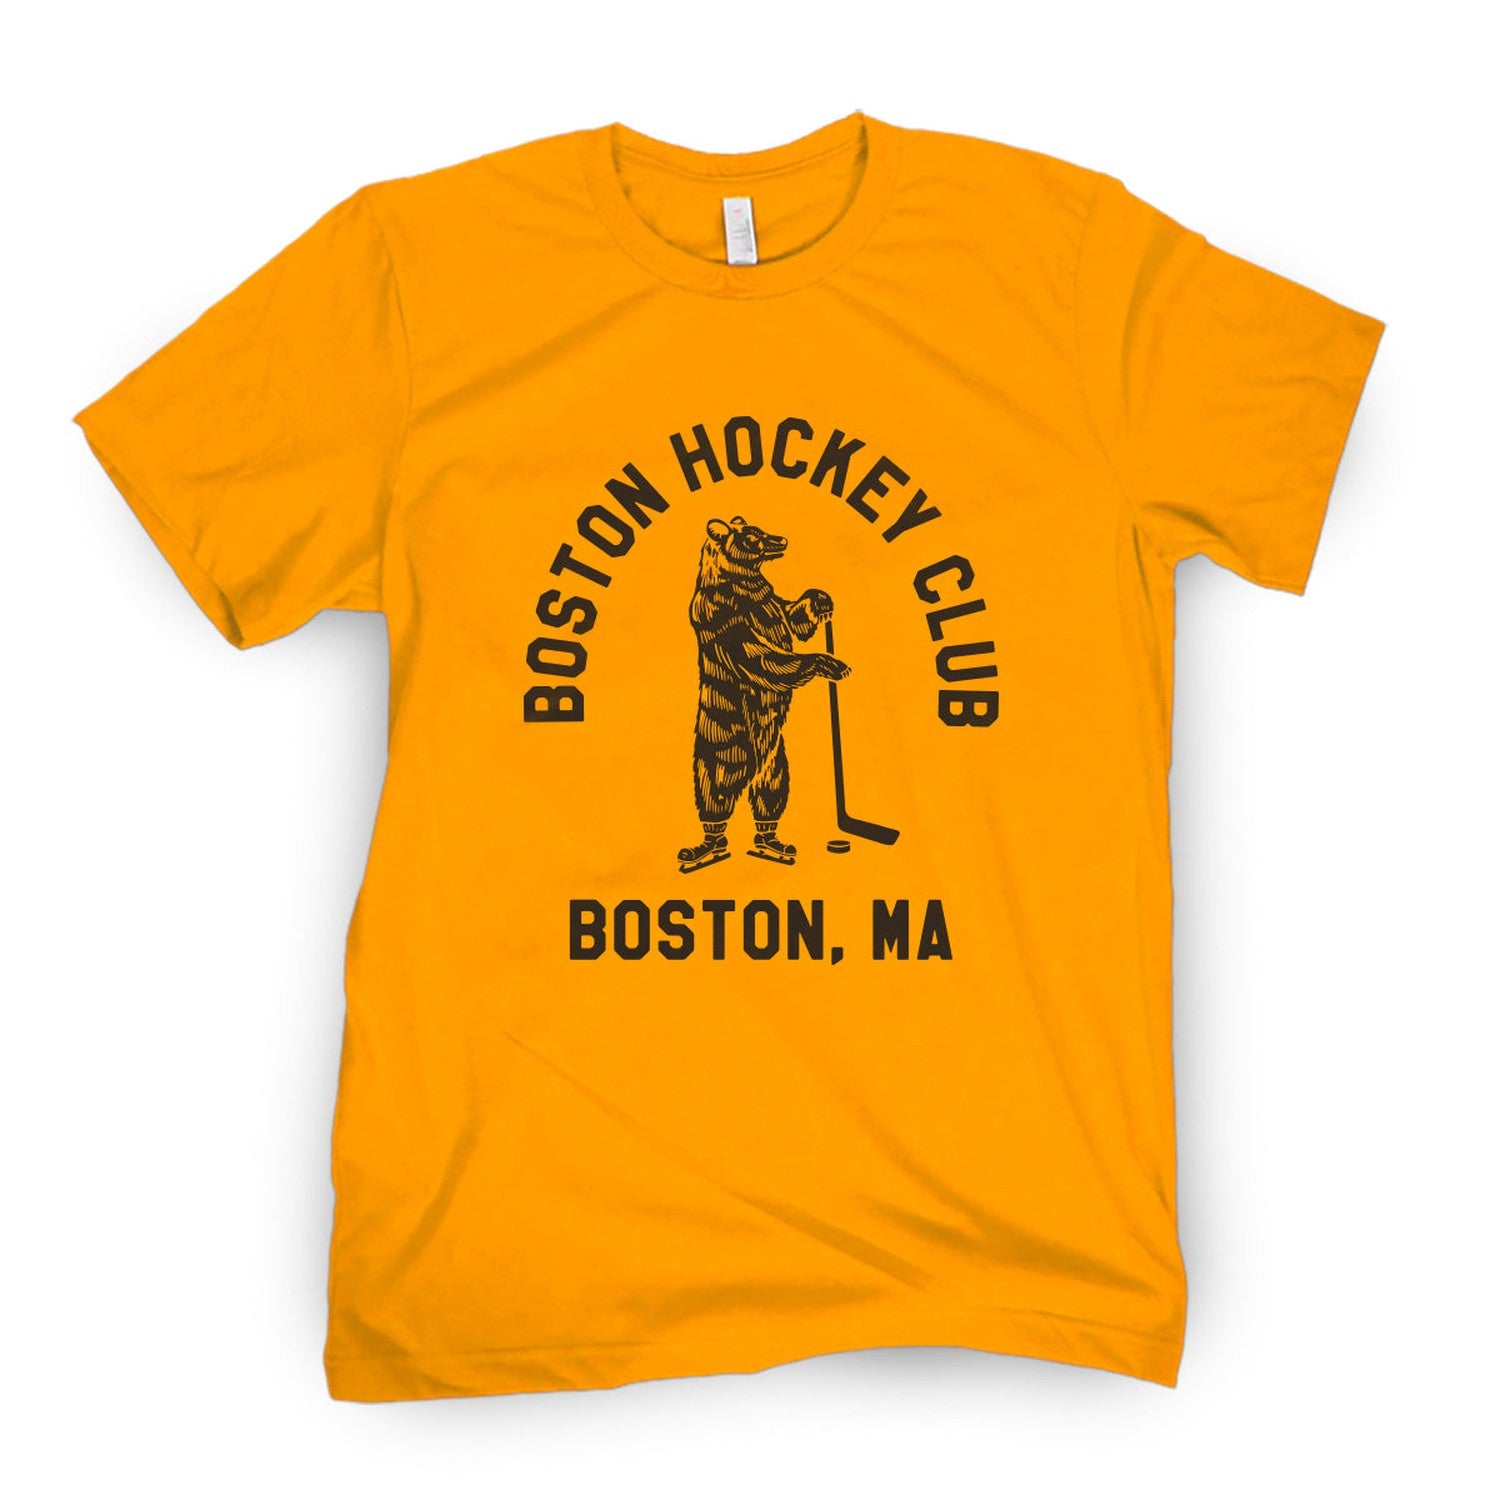 The 10 best hockey t-shirts currently available online - Article - Bardown